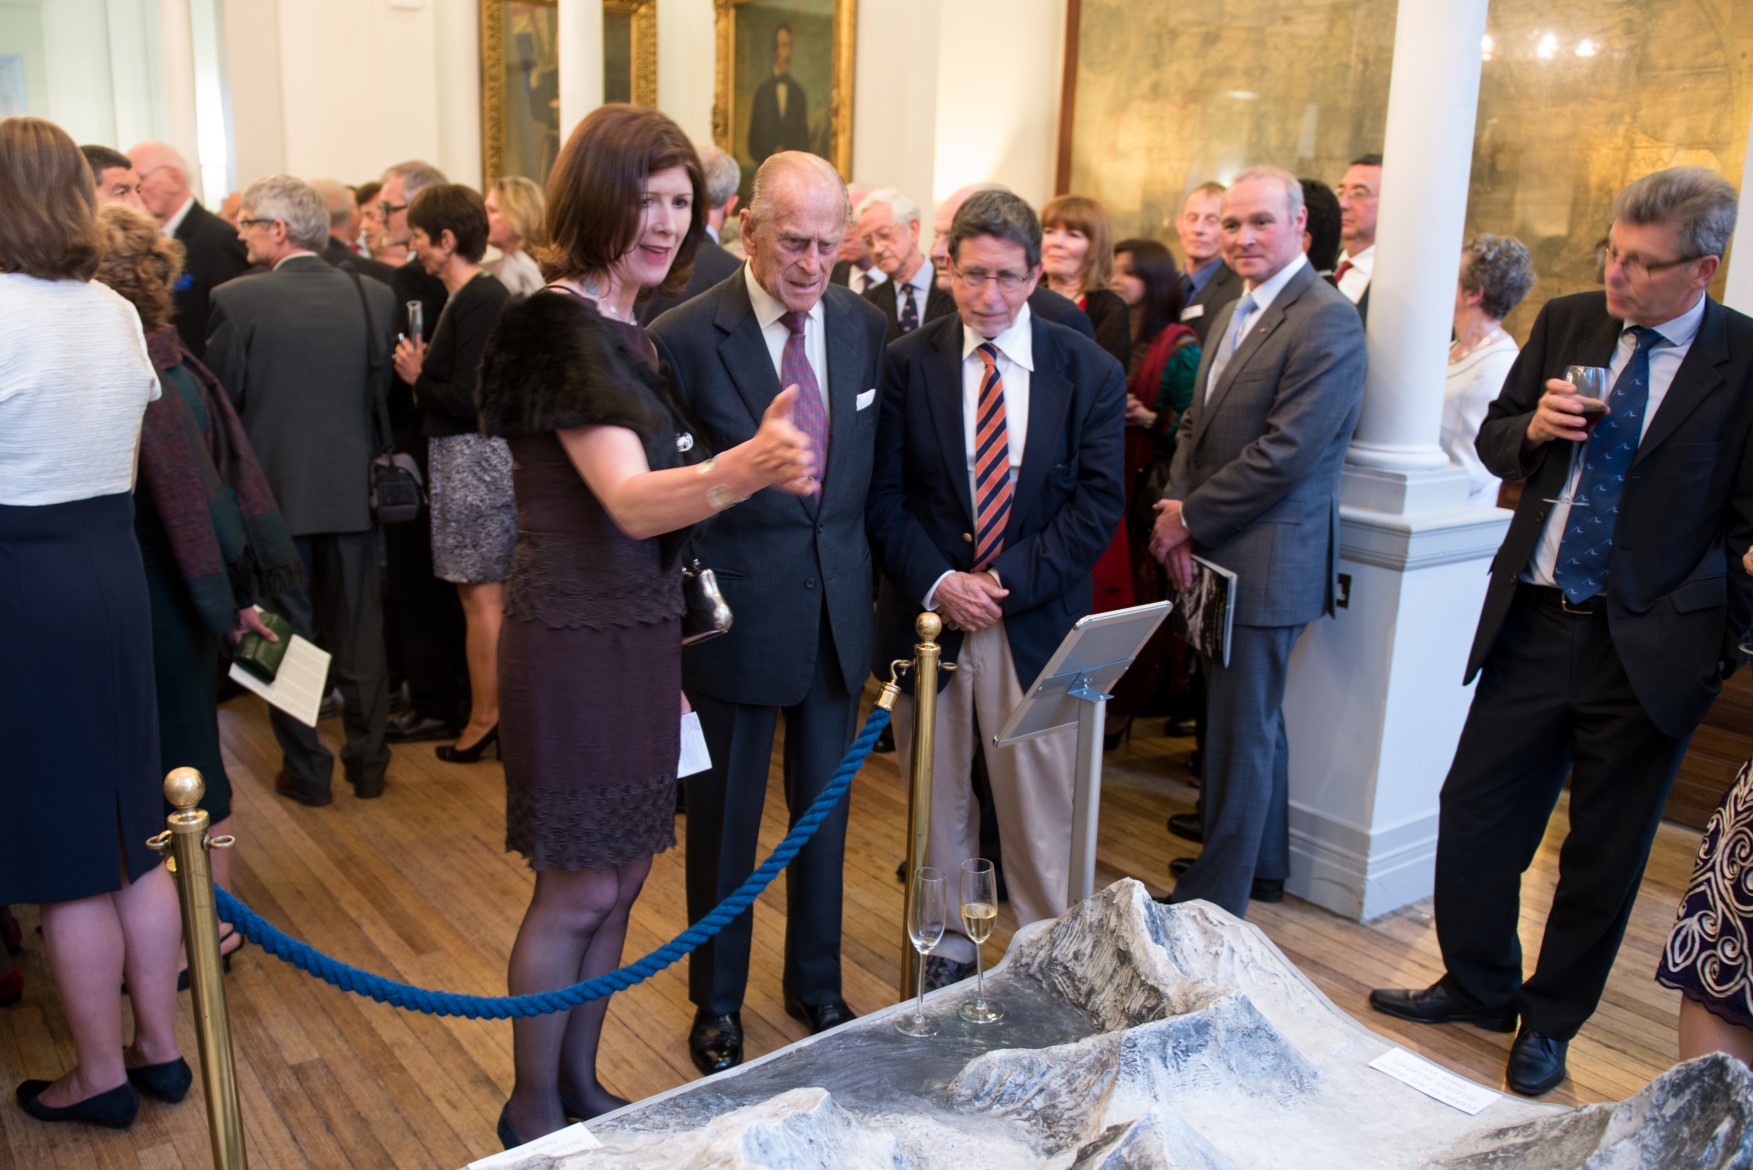 HRH Prince Philip in the Society's Map Room during the Mount Everest 60th Anniversary event, courtesy of James Finlay.